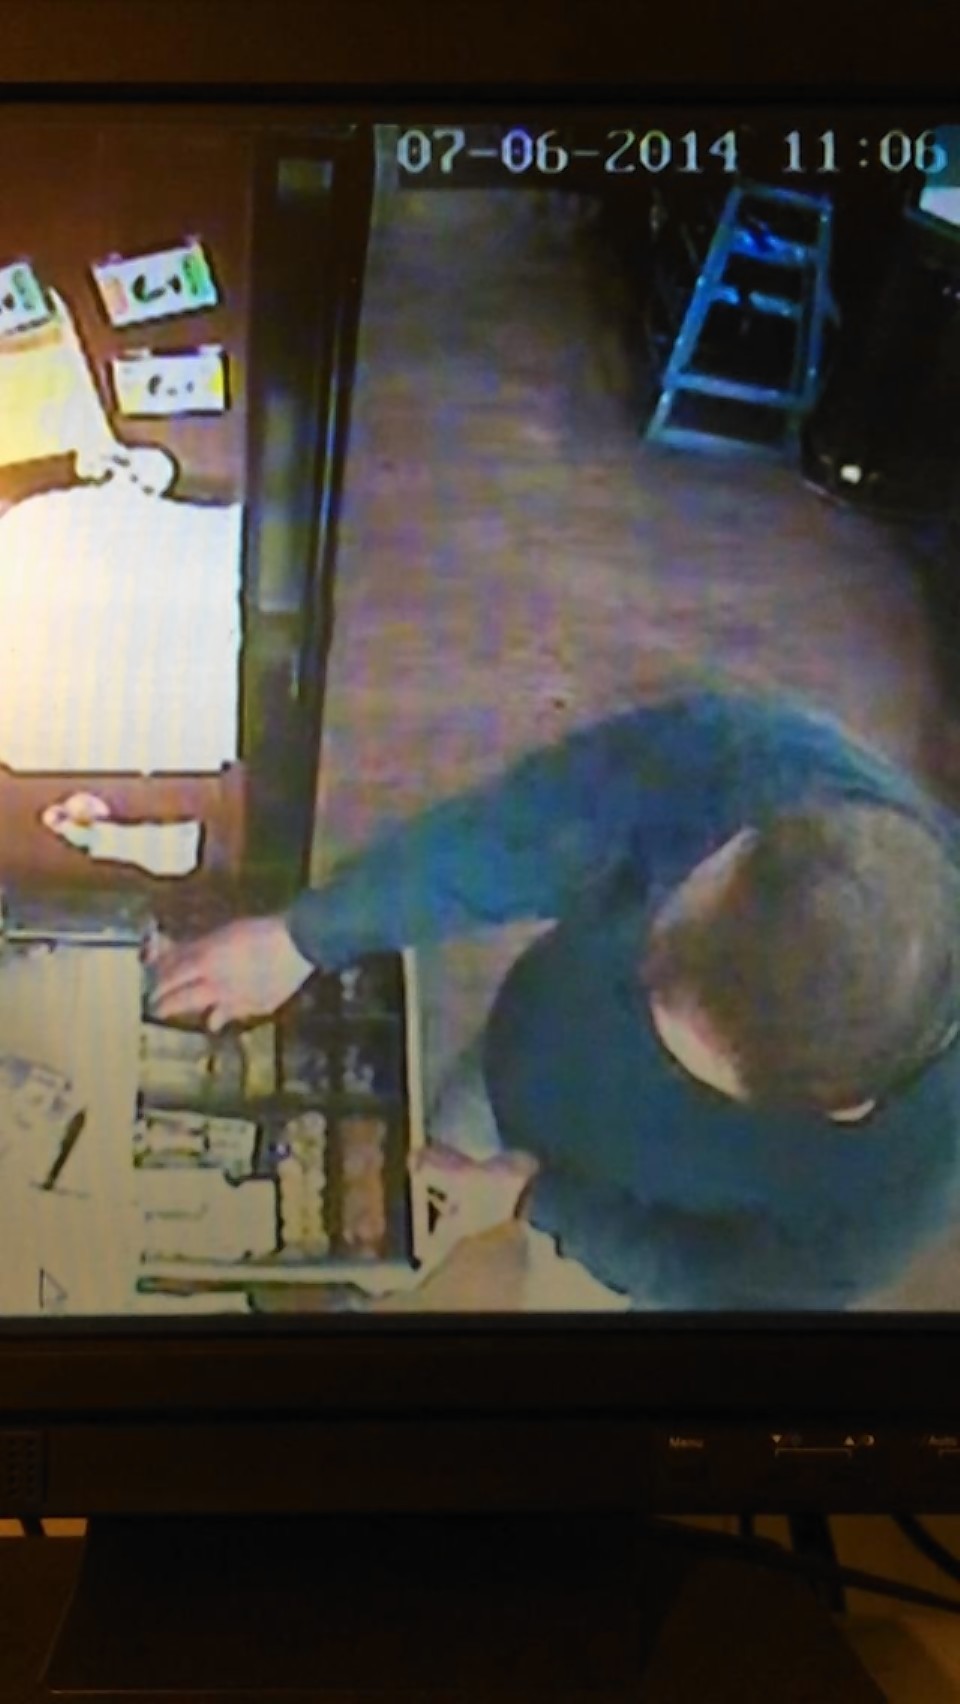 Police are searching for the man seen in this CCTV image in La Lombarda restaurant, Aberdeen